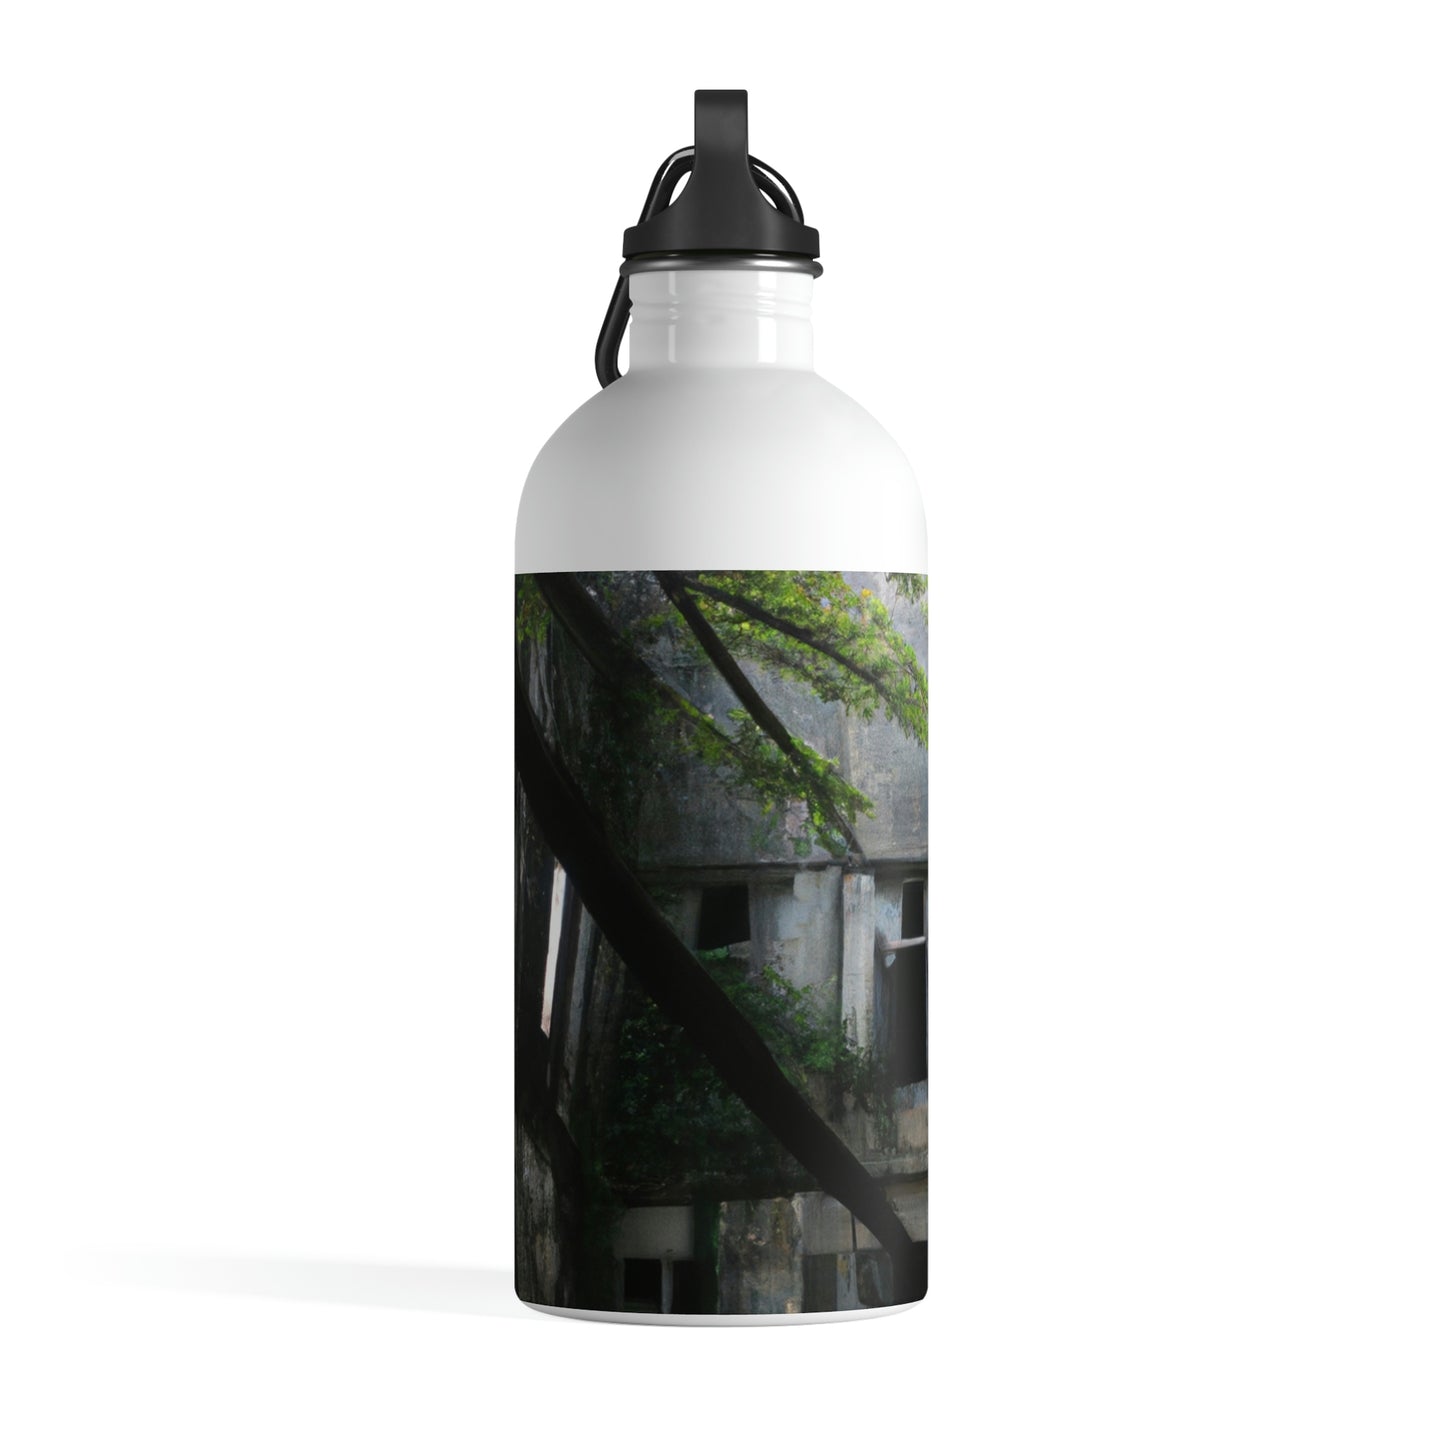 "The Mystery of the Ancient Mansion" - The Alien Stainless Steel Water Bottle